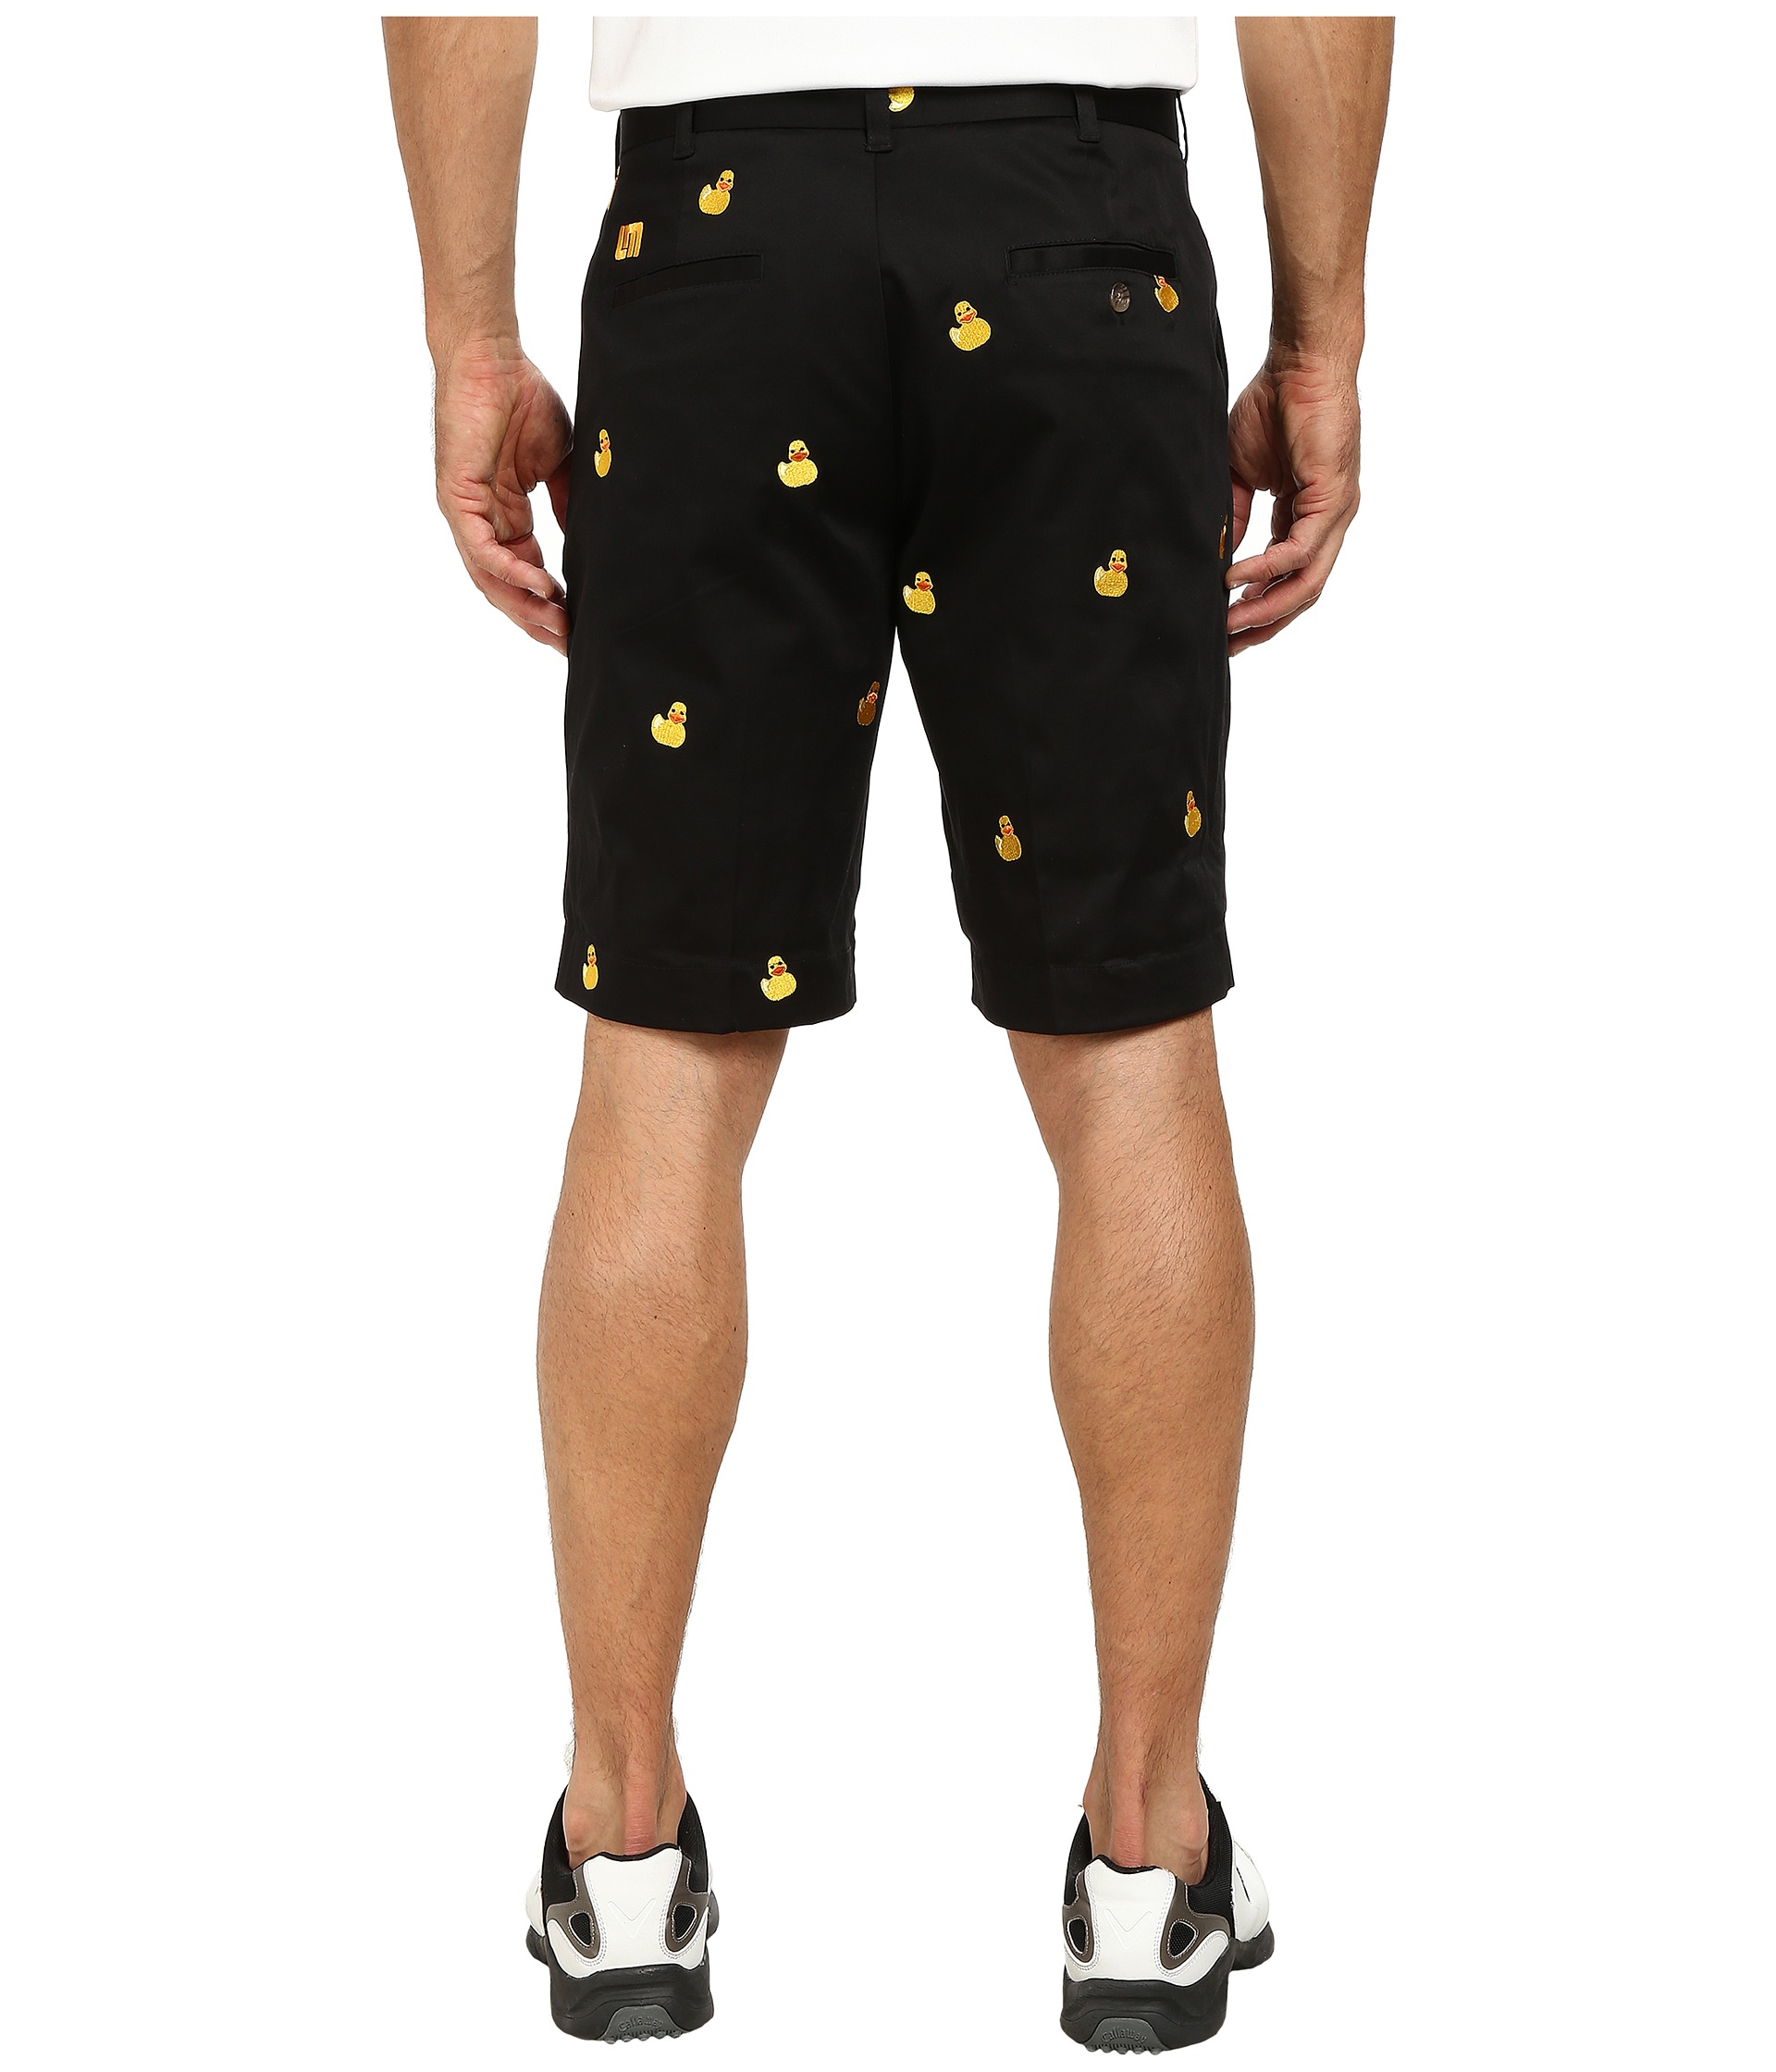 Loudmouth Golf Rubber Duckies Shorts Black - Zappos.com Free Shipping ...